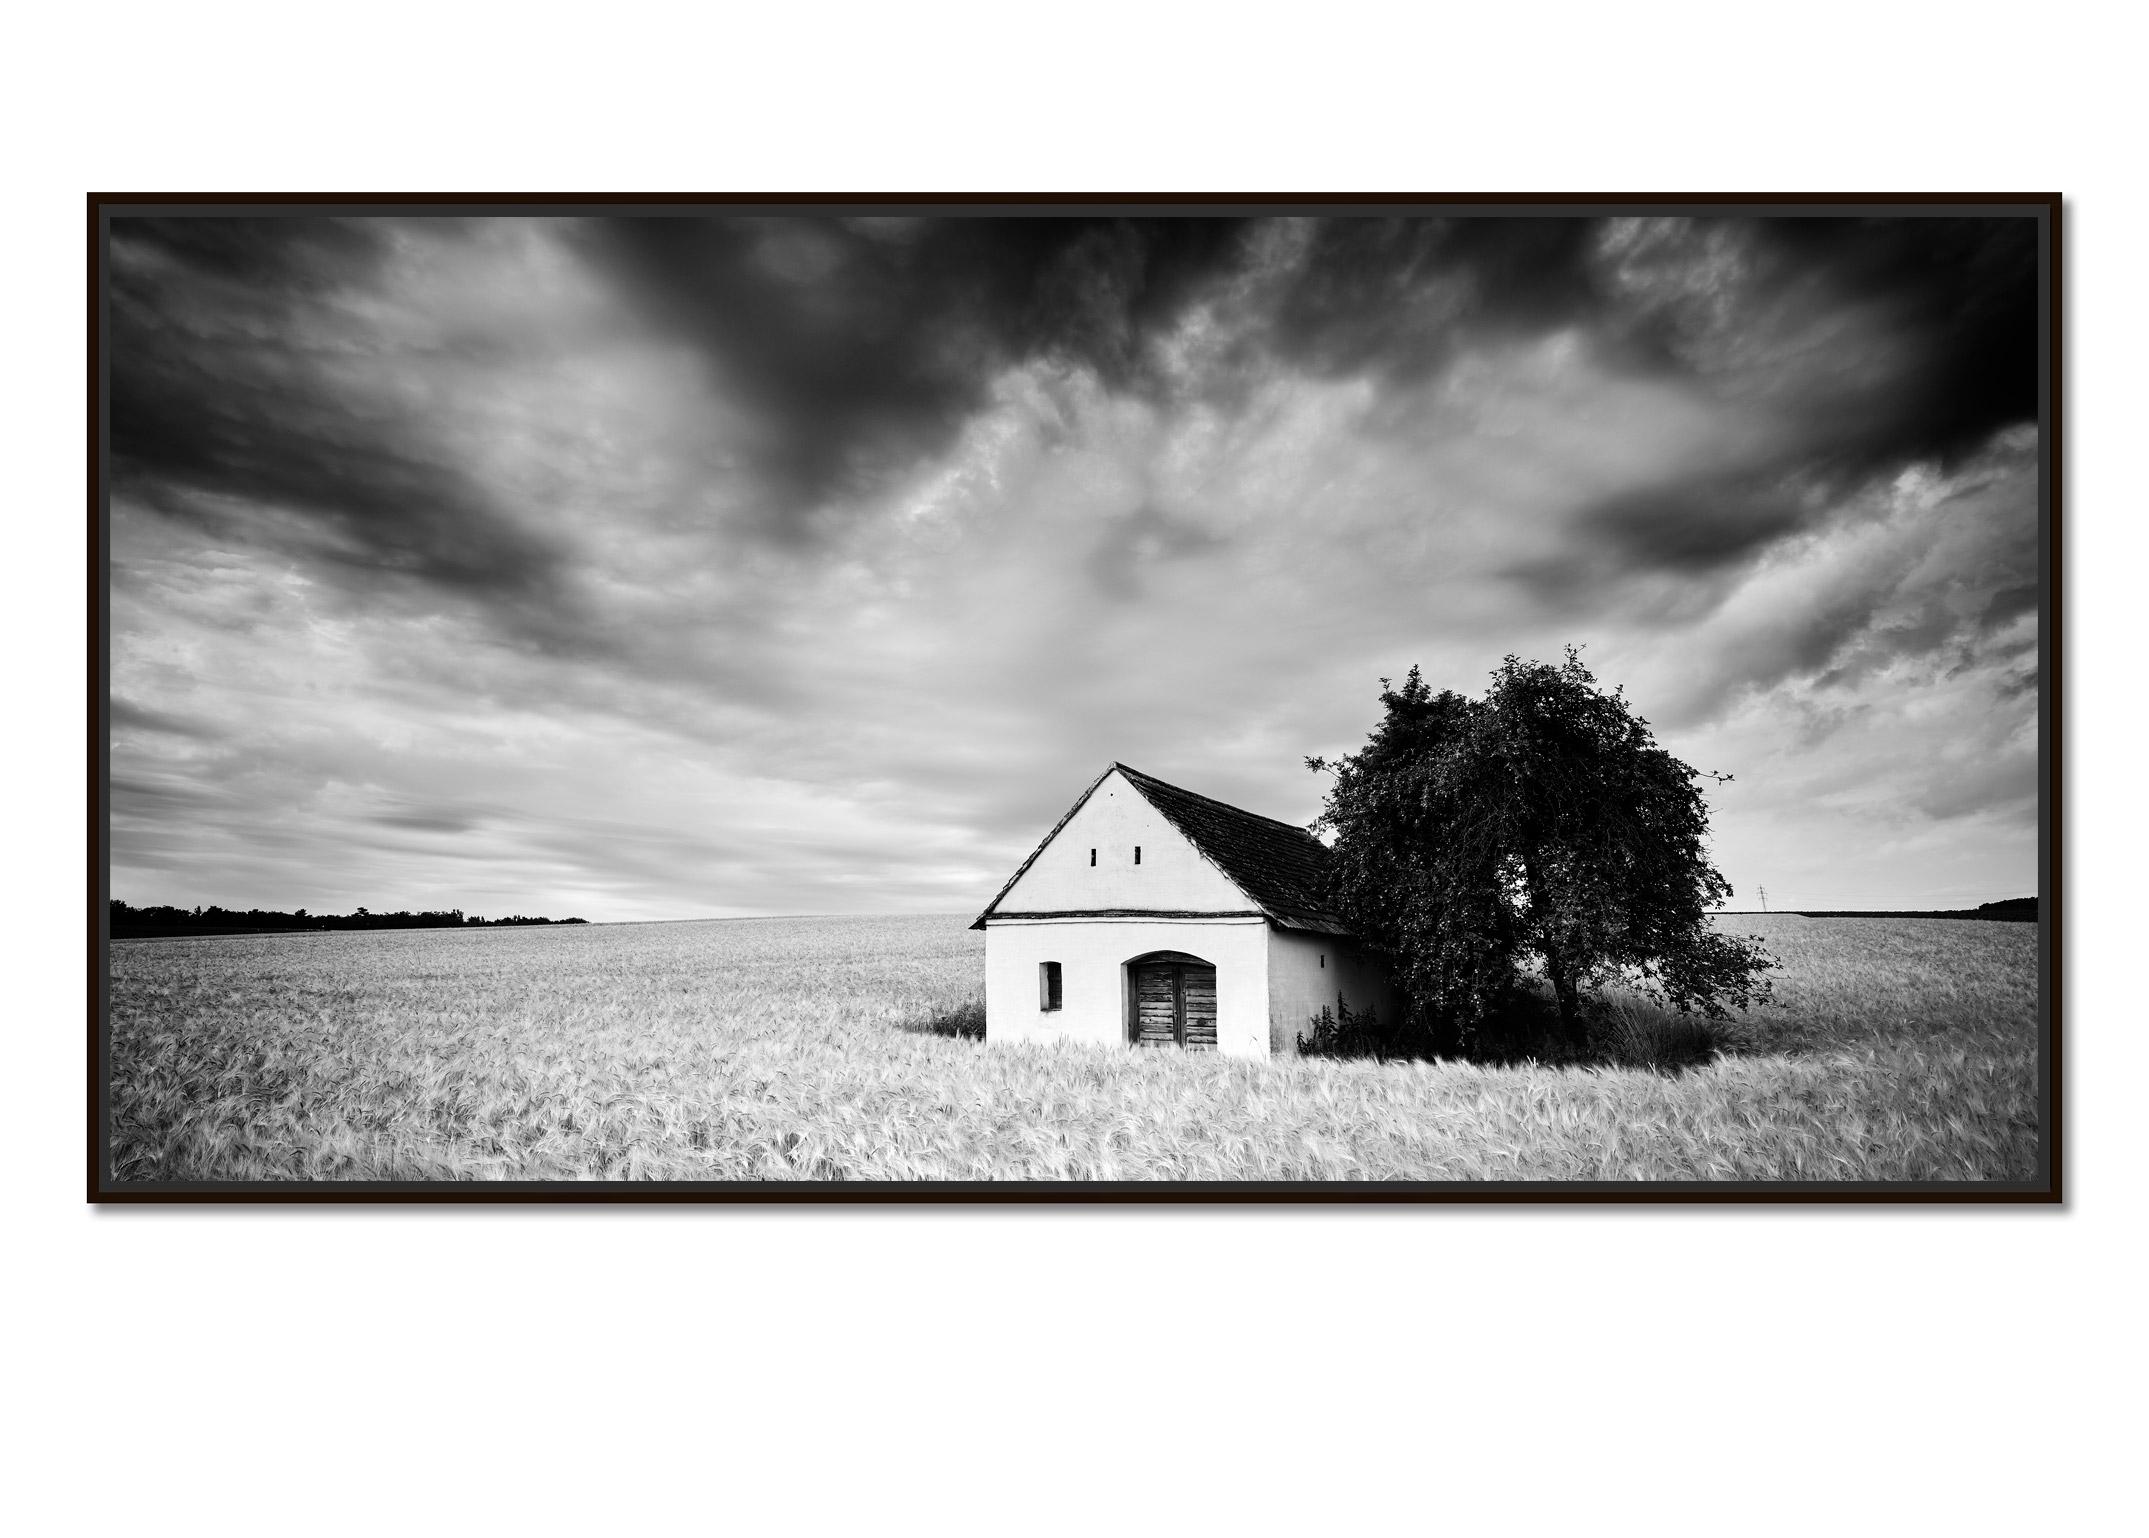 Wine Press House Panorama, Farmland, black and white photography, art landscape - Photograph by Gerald Berghammer